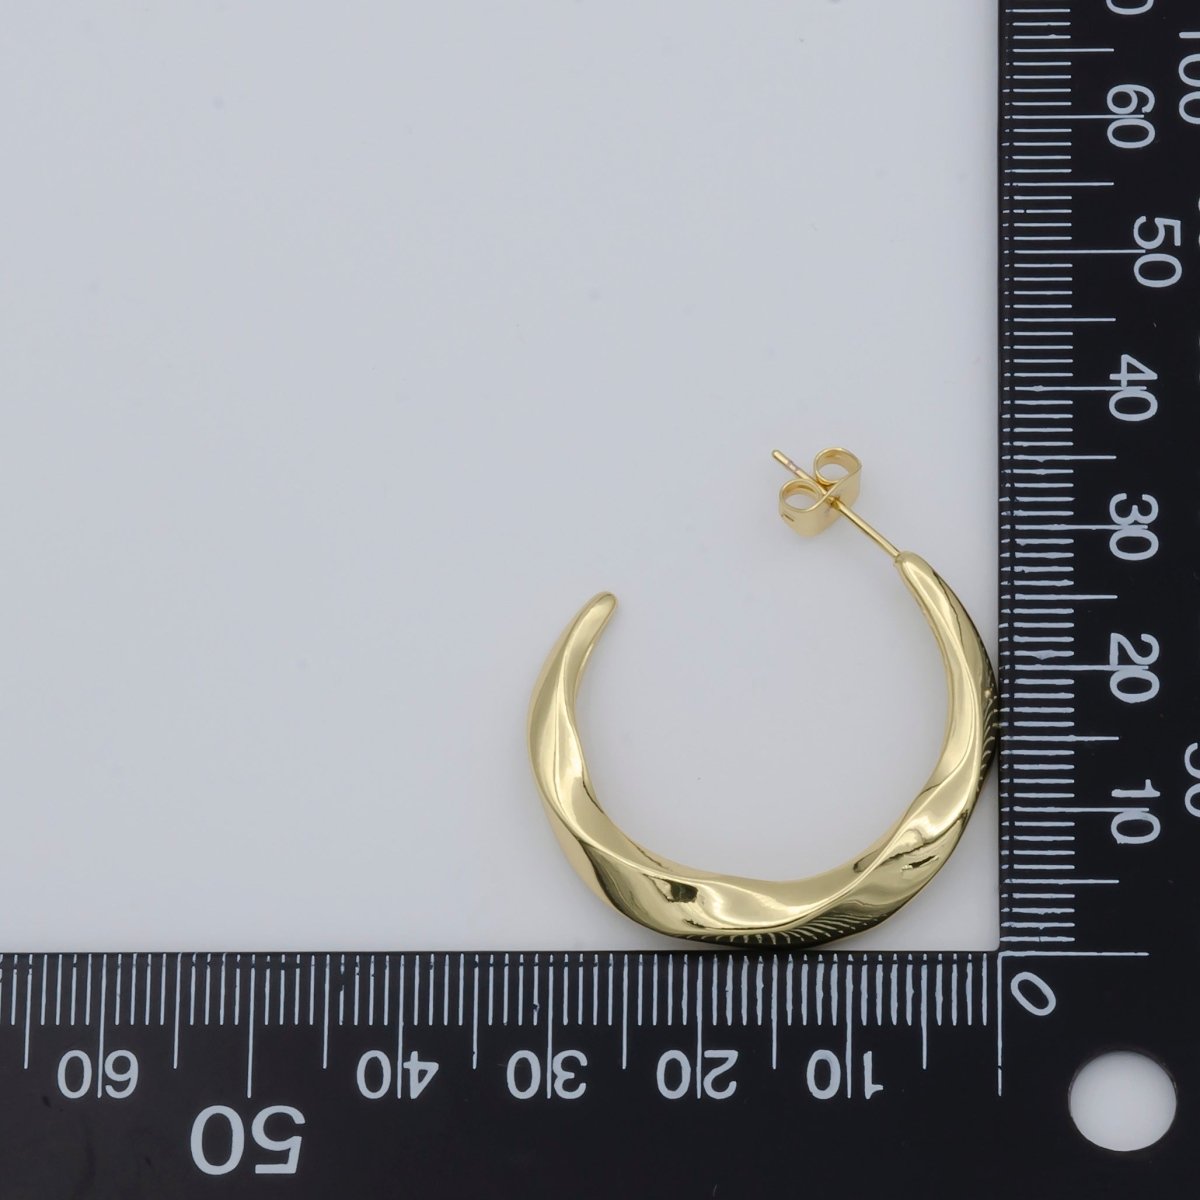 Simple Golden Crescent Model Huggies Earrings, Plain Gold Filled Nature Night Object Formal/Casual Daily Wear Earring Jewelry P-117 - DLUXCA